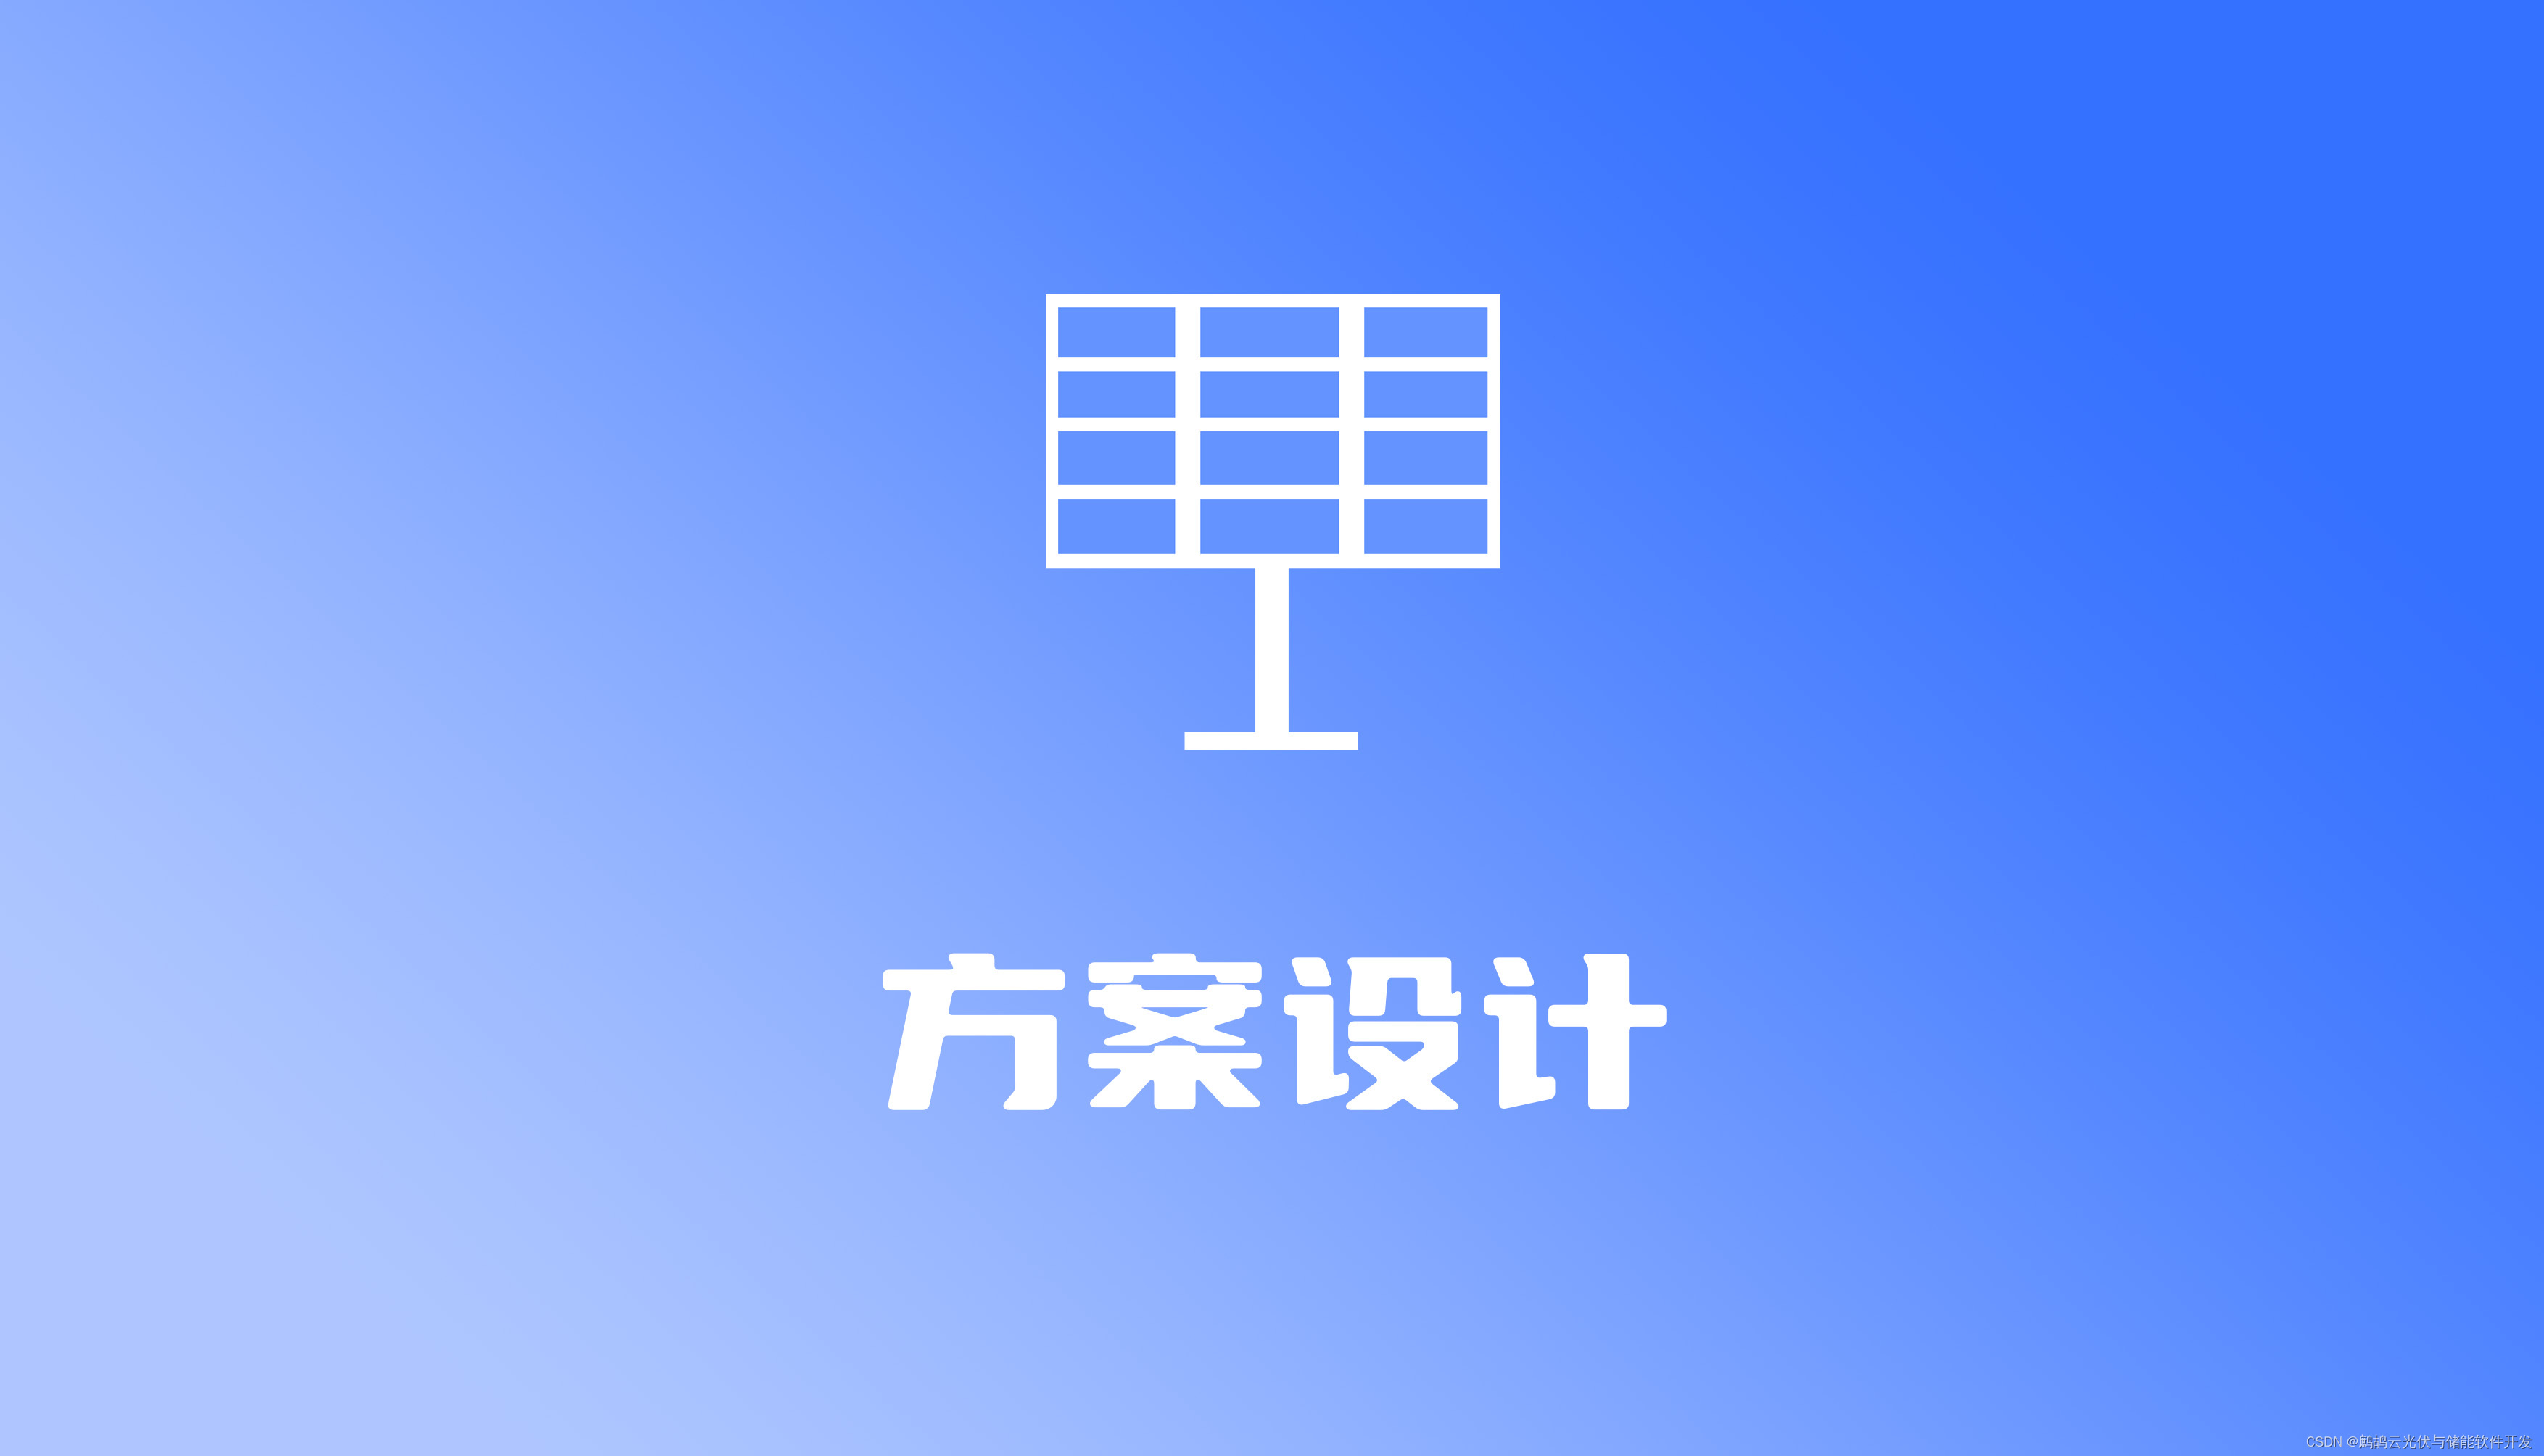 <span style='color:red;'>光</span><span style='color:red;'>伏</span>系统<span style='color:red;'>方案</span><span style='color:red;'>设计</span><span style='color:red;'>的</span>注意点